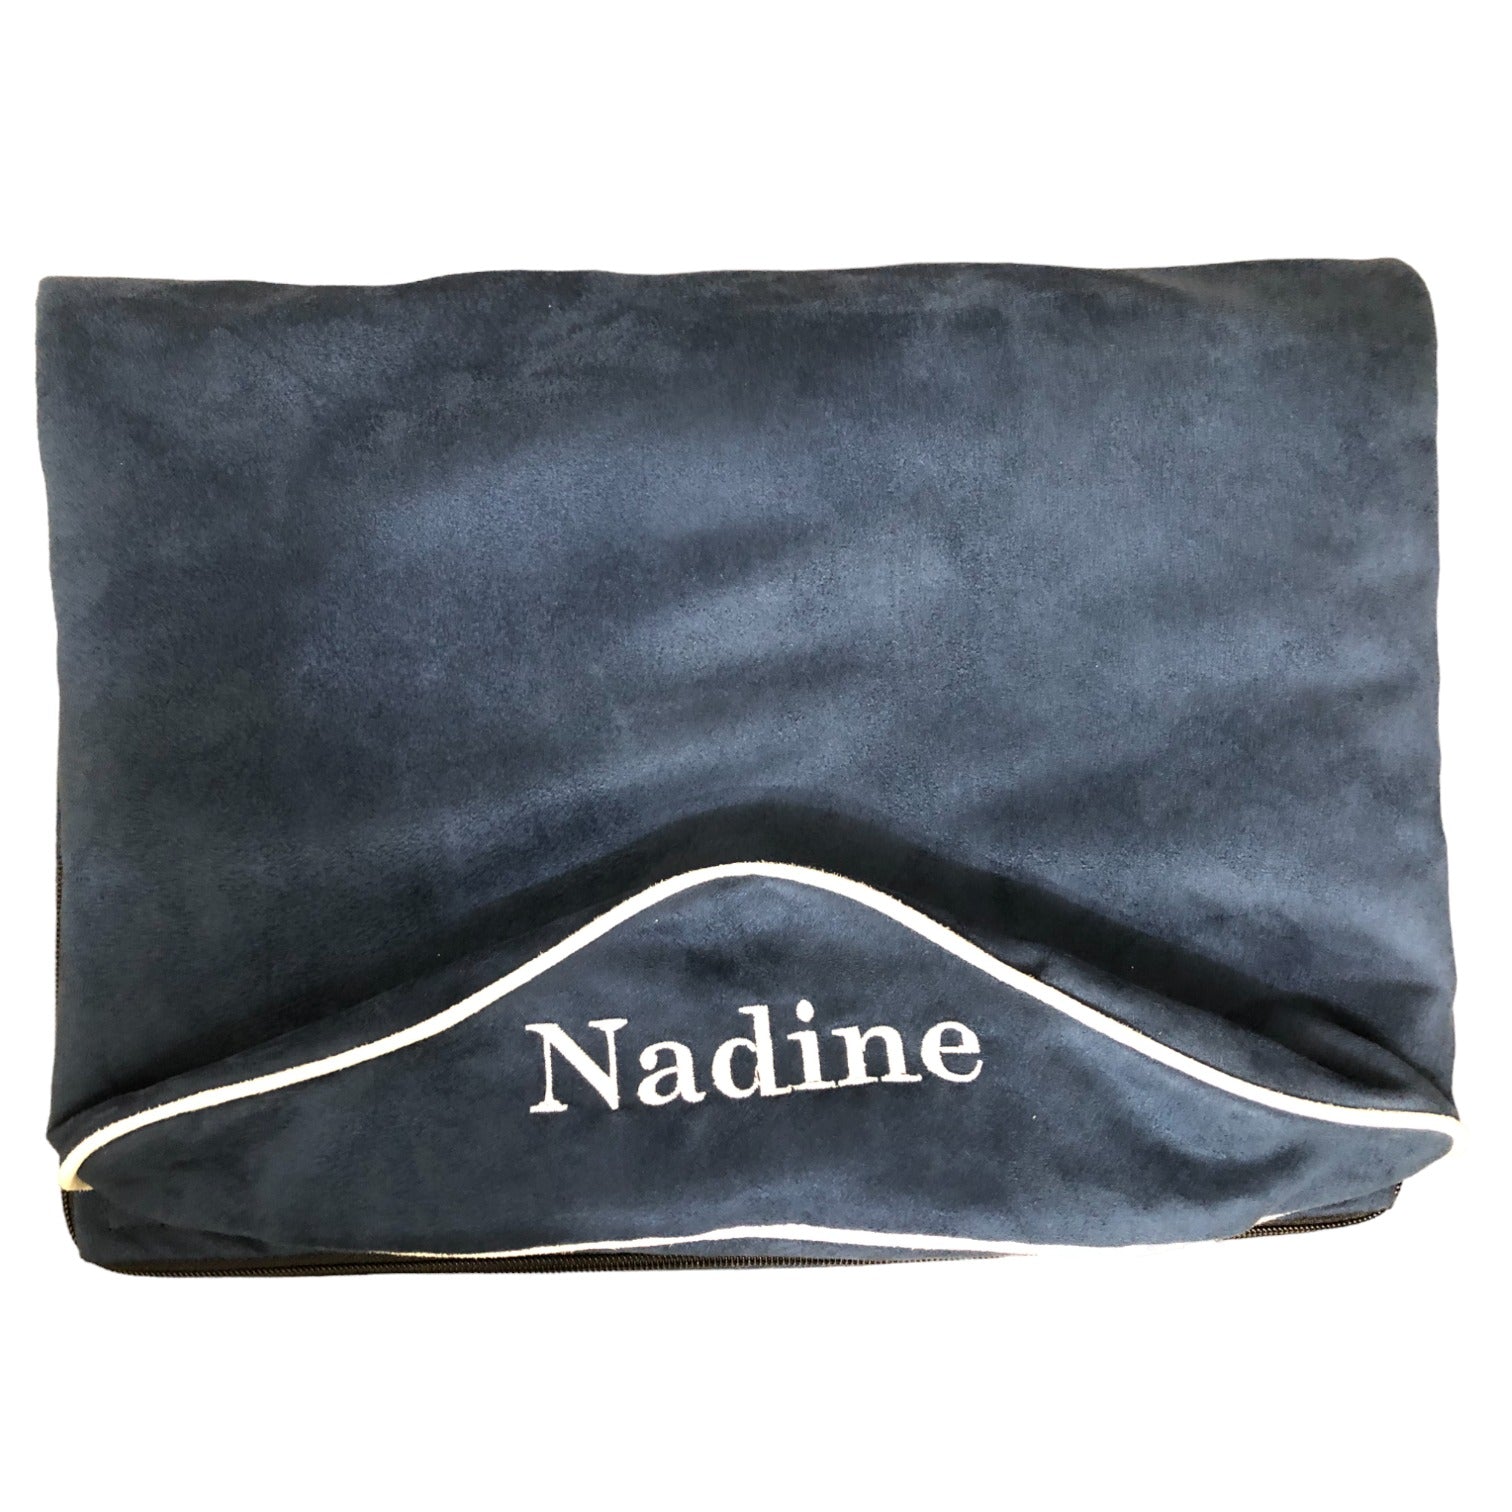 SaddleMattress Supreme Replacement Cover - Personalized in Black or Dark Blue